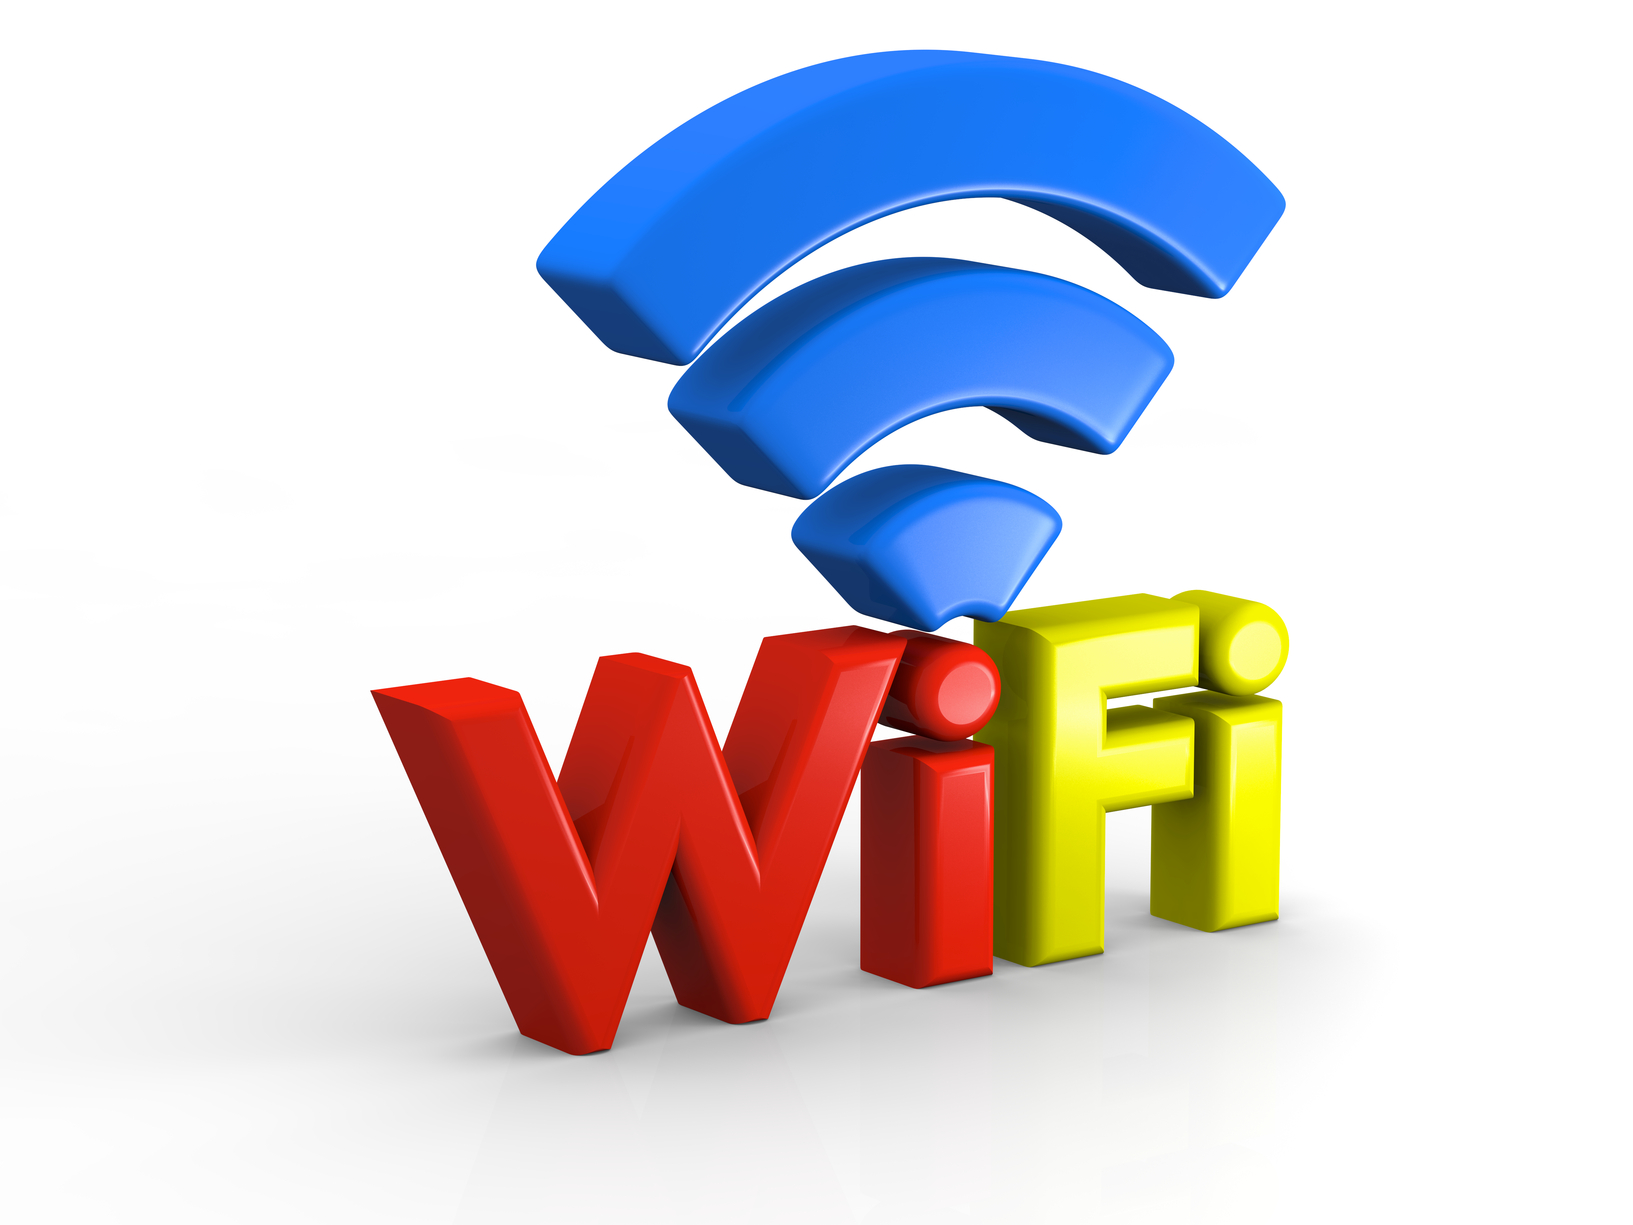 WI FI NETWORKING, data cabling installers